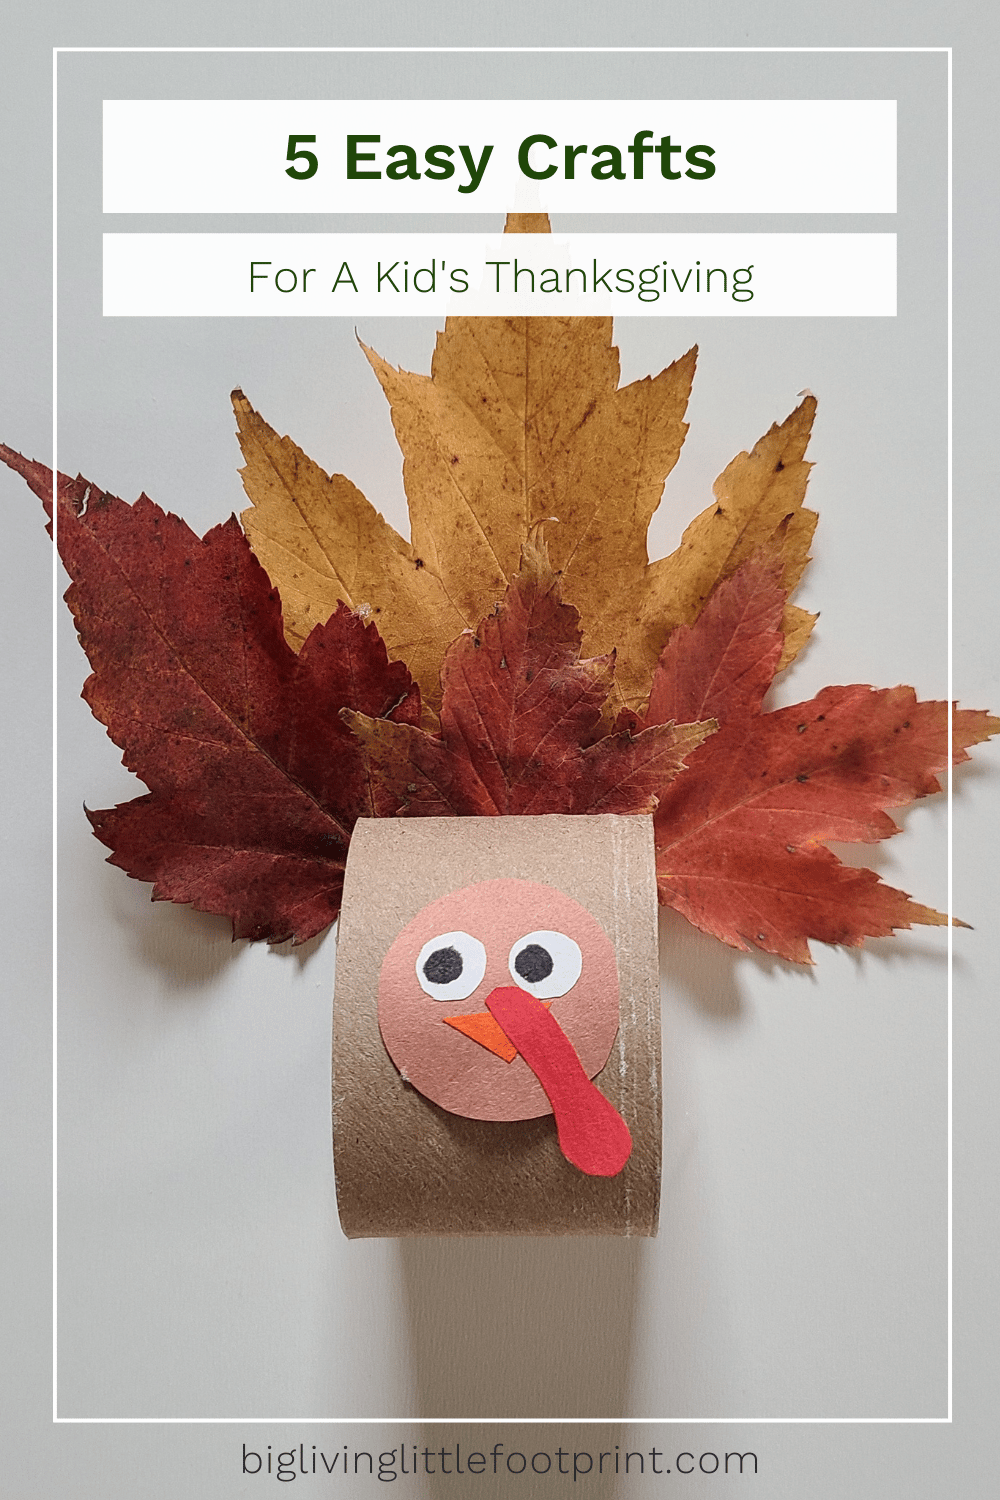 easy crafts for kid's thanksgiving - leaf toilet roll turkey